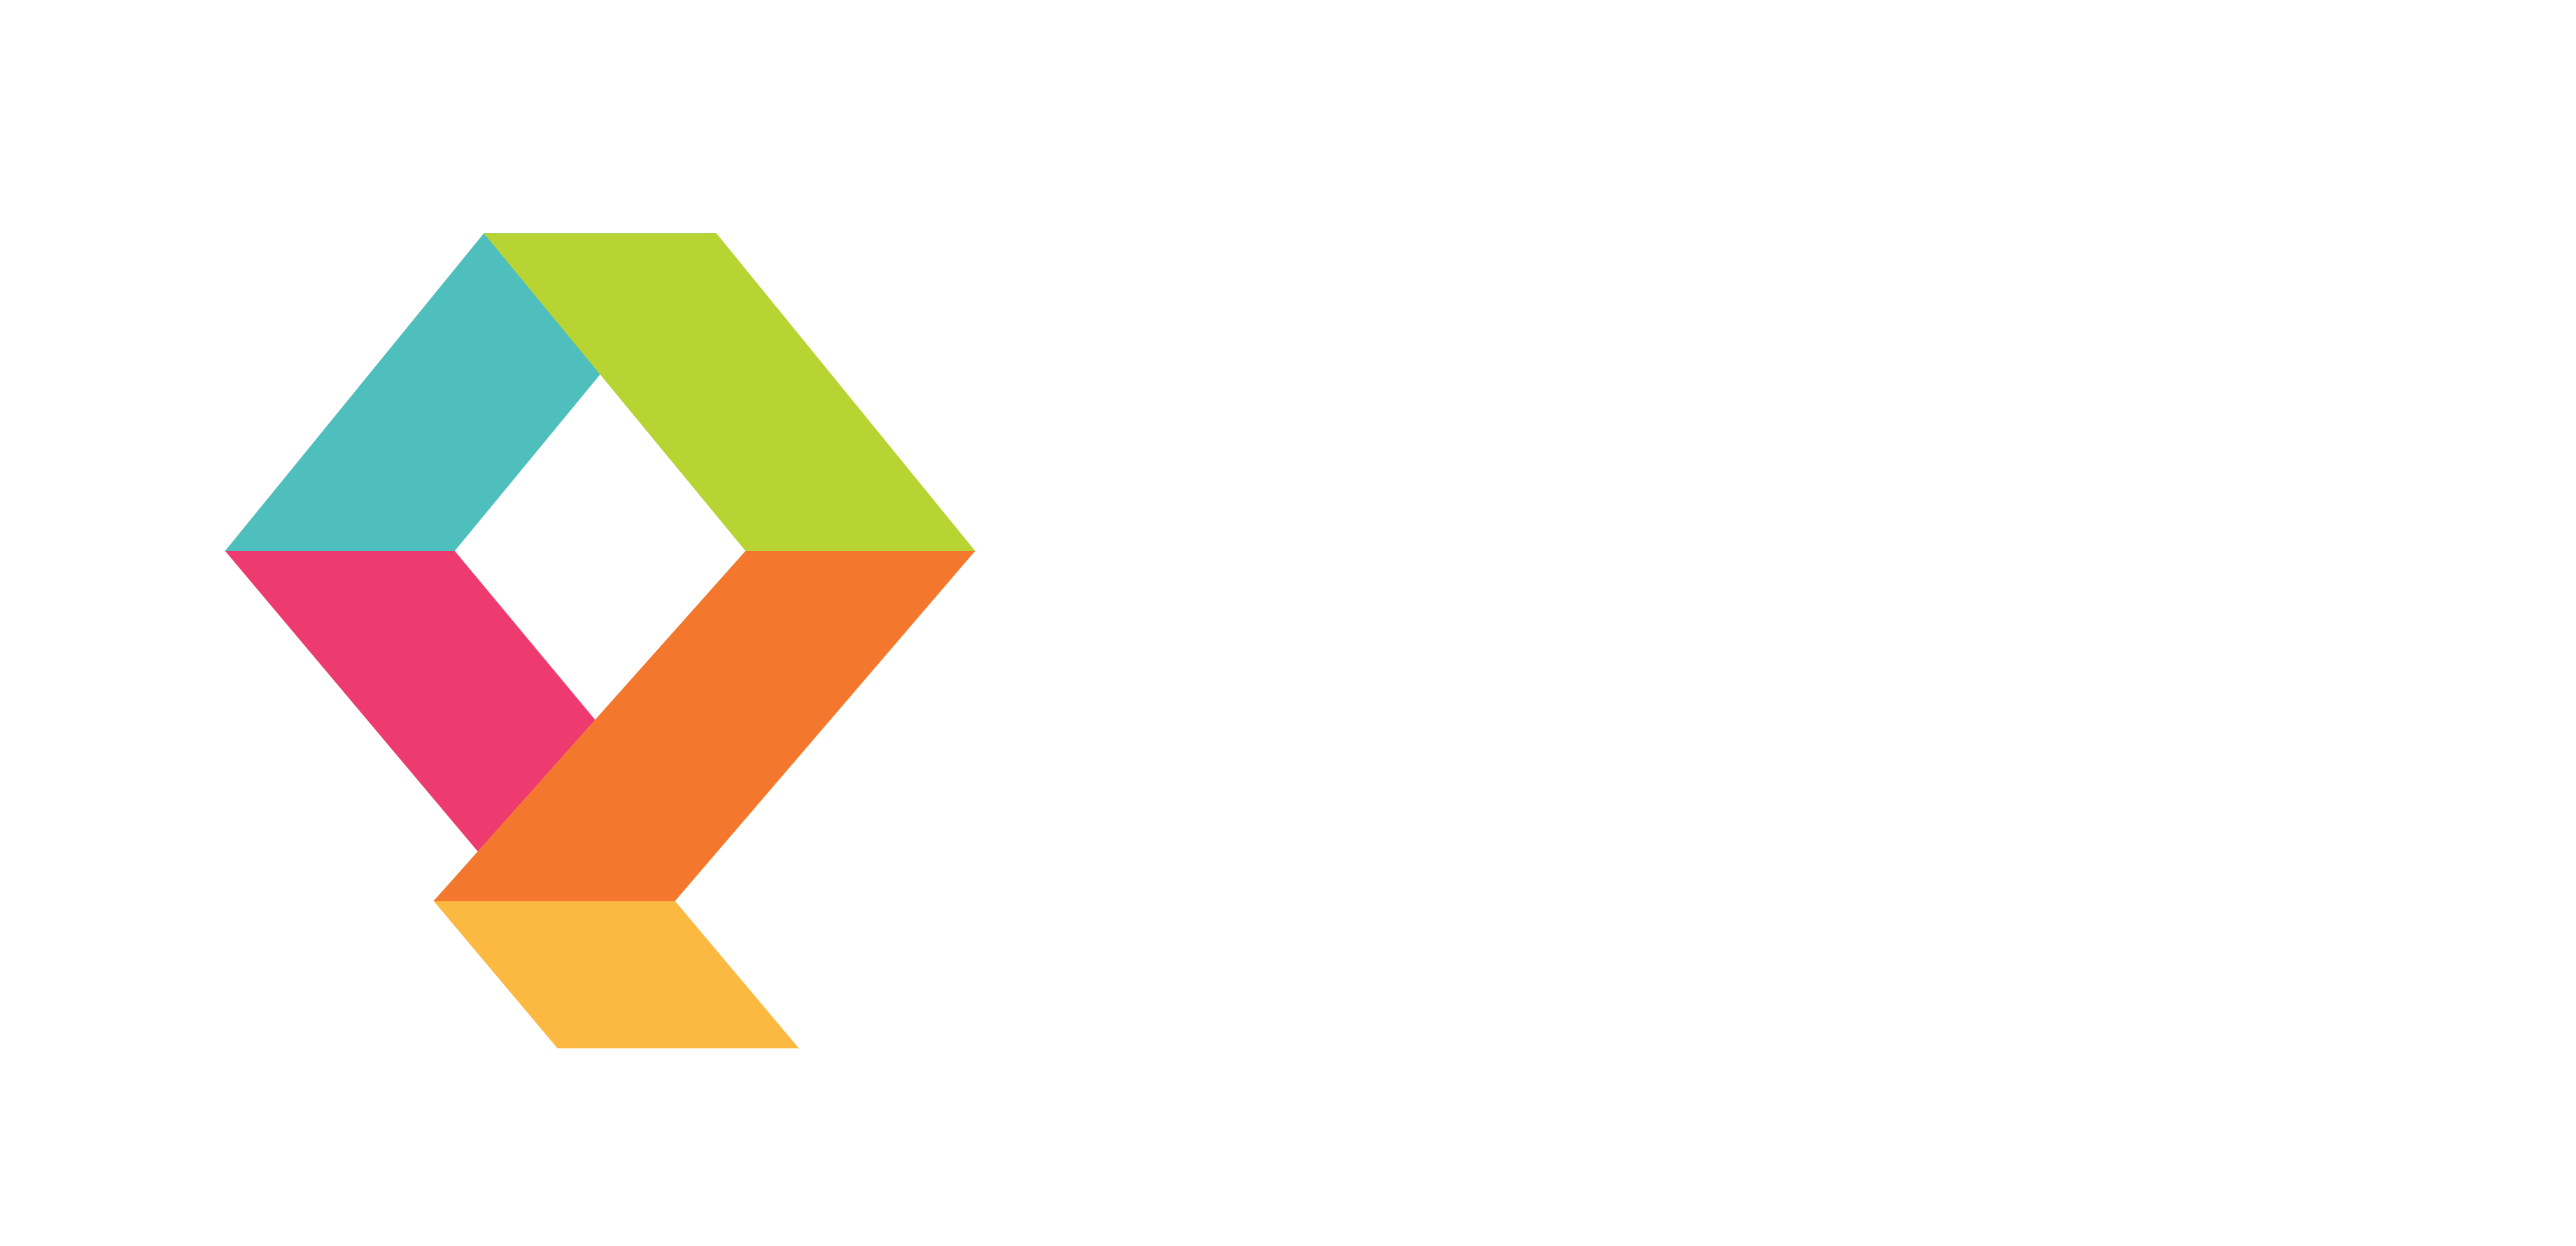 QILT. Quality indicators for learning and teaching